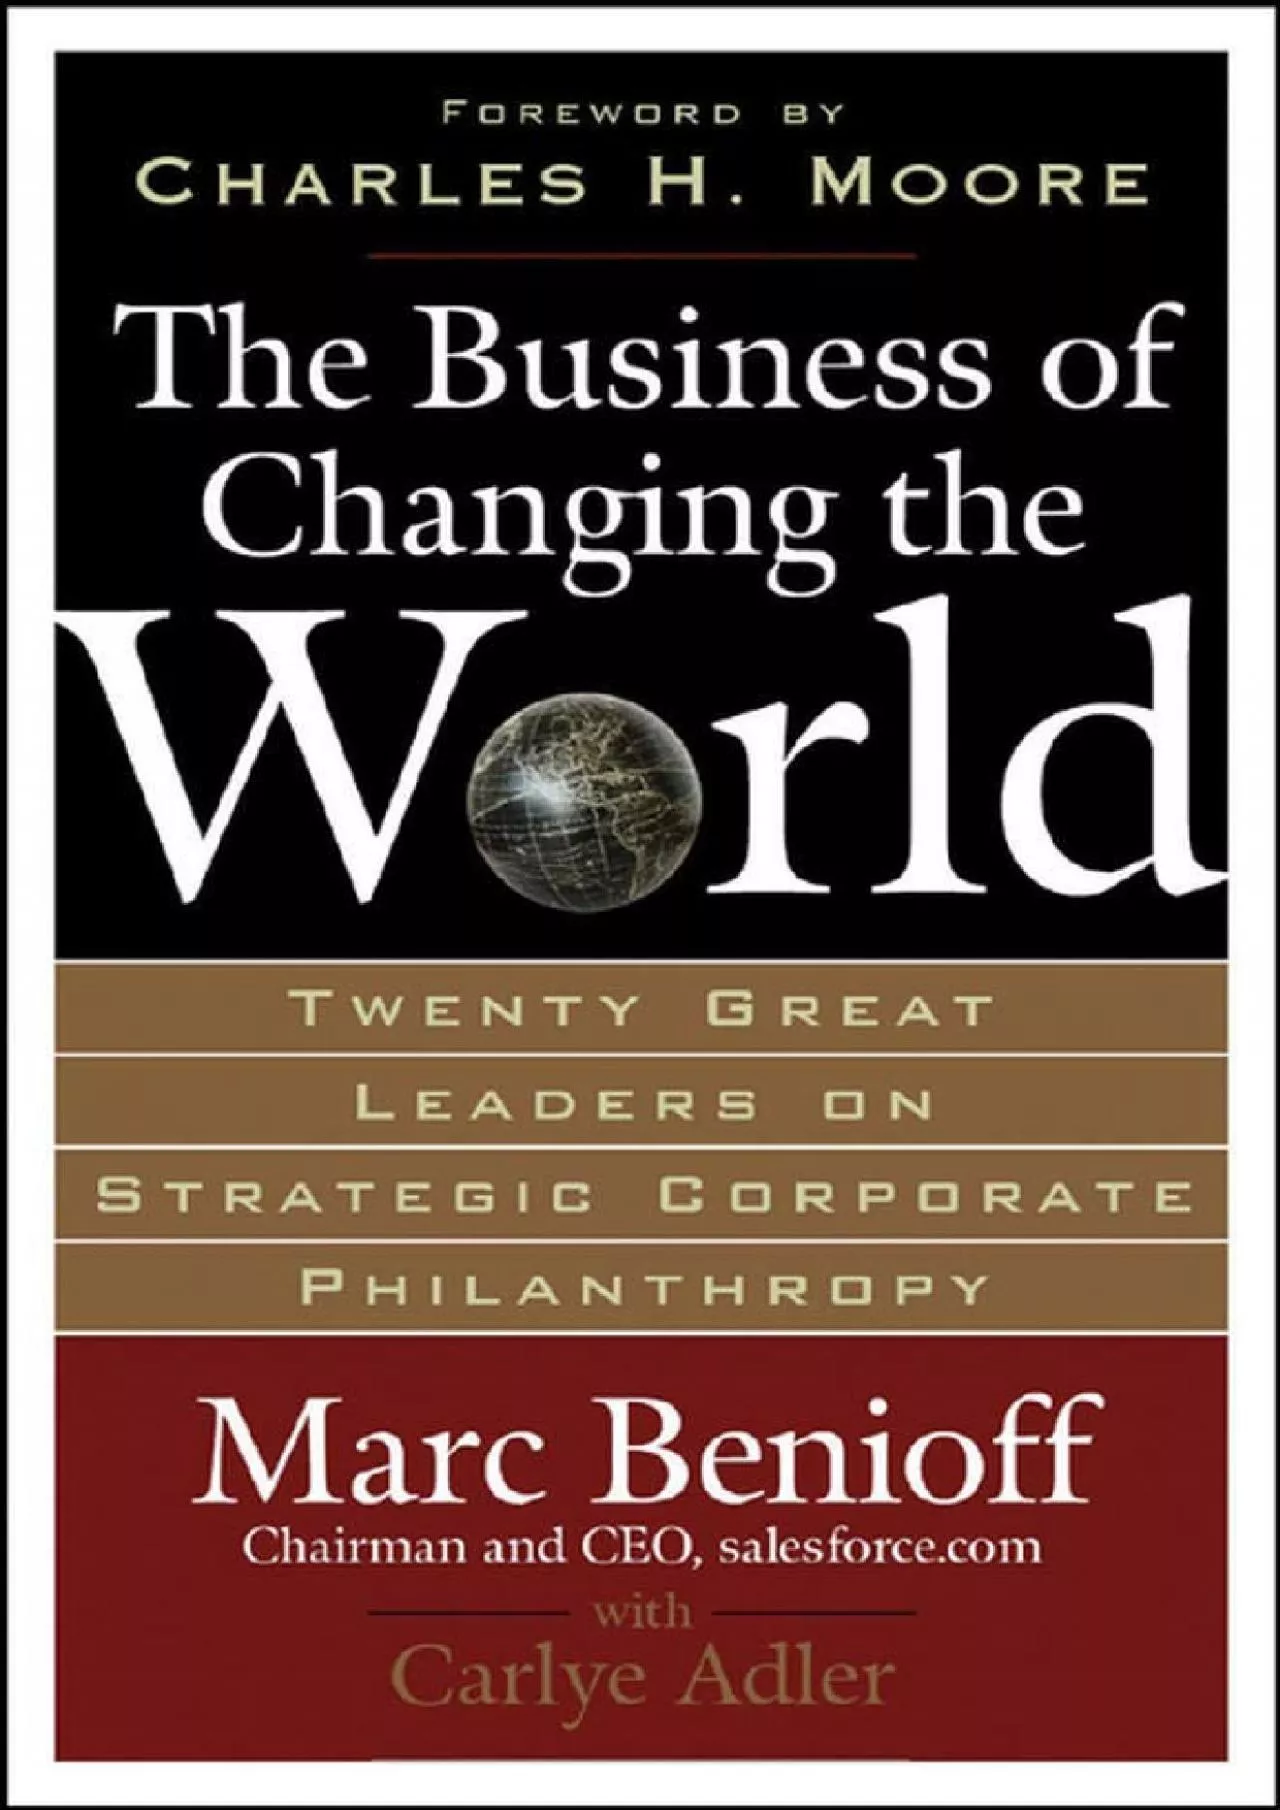 (BOOK)-The Business of Changing the World: Twenty Great Leaders on Strategic Corporate